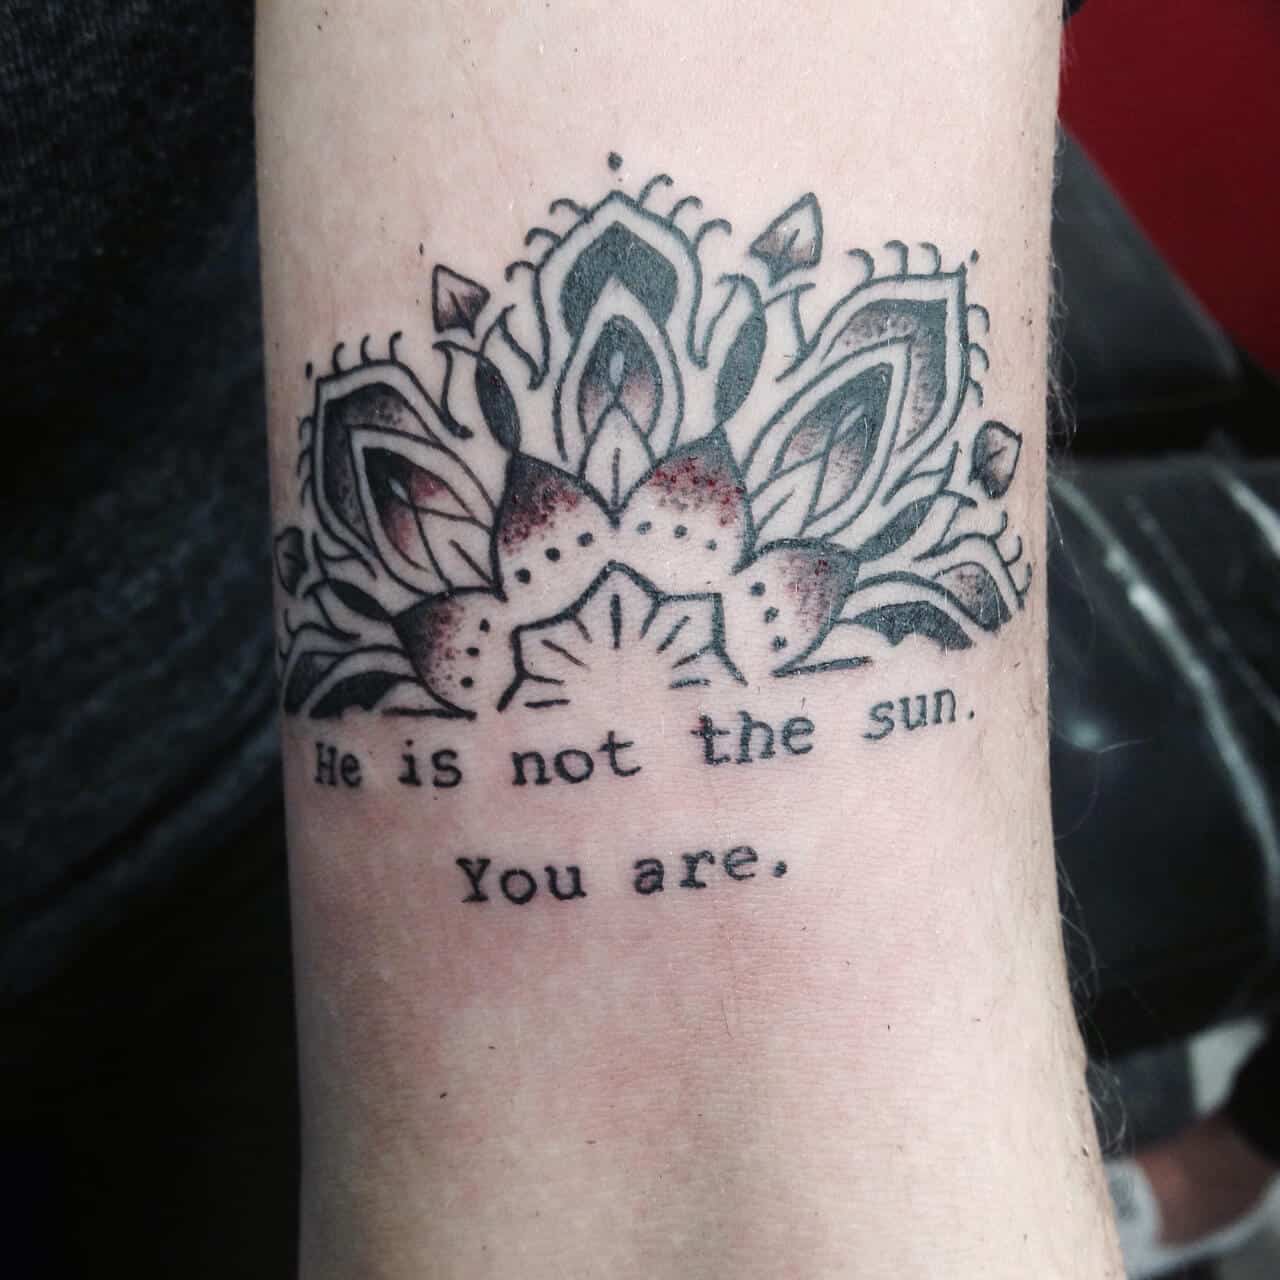 "He is not the sun. You are." quote with mandala graphic tattoo